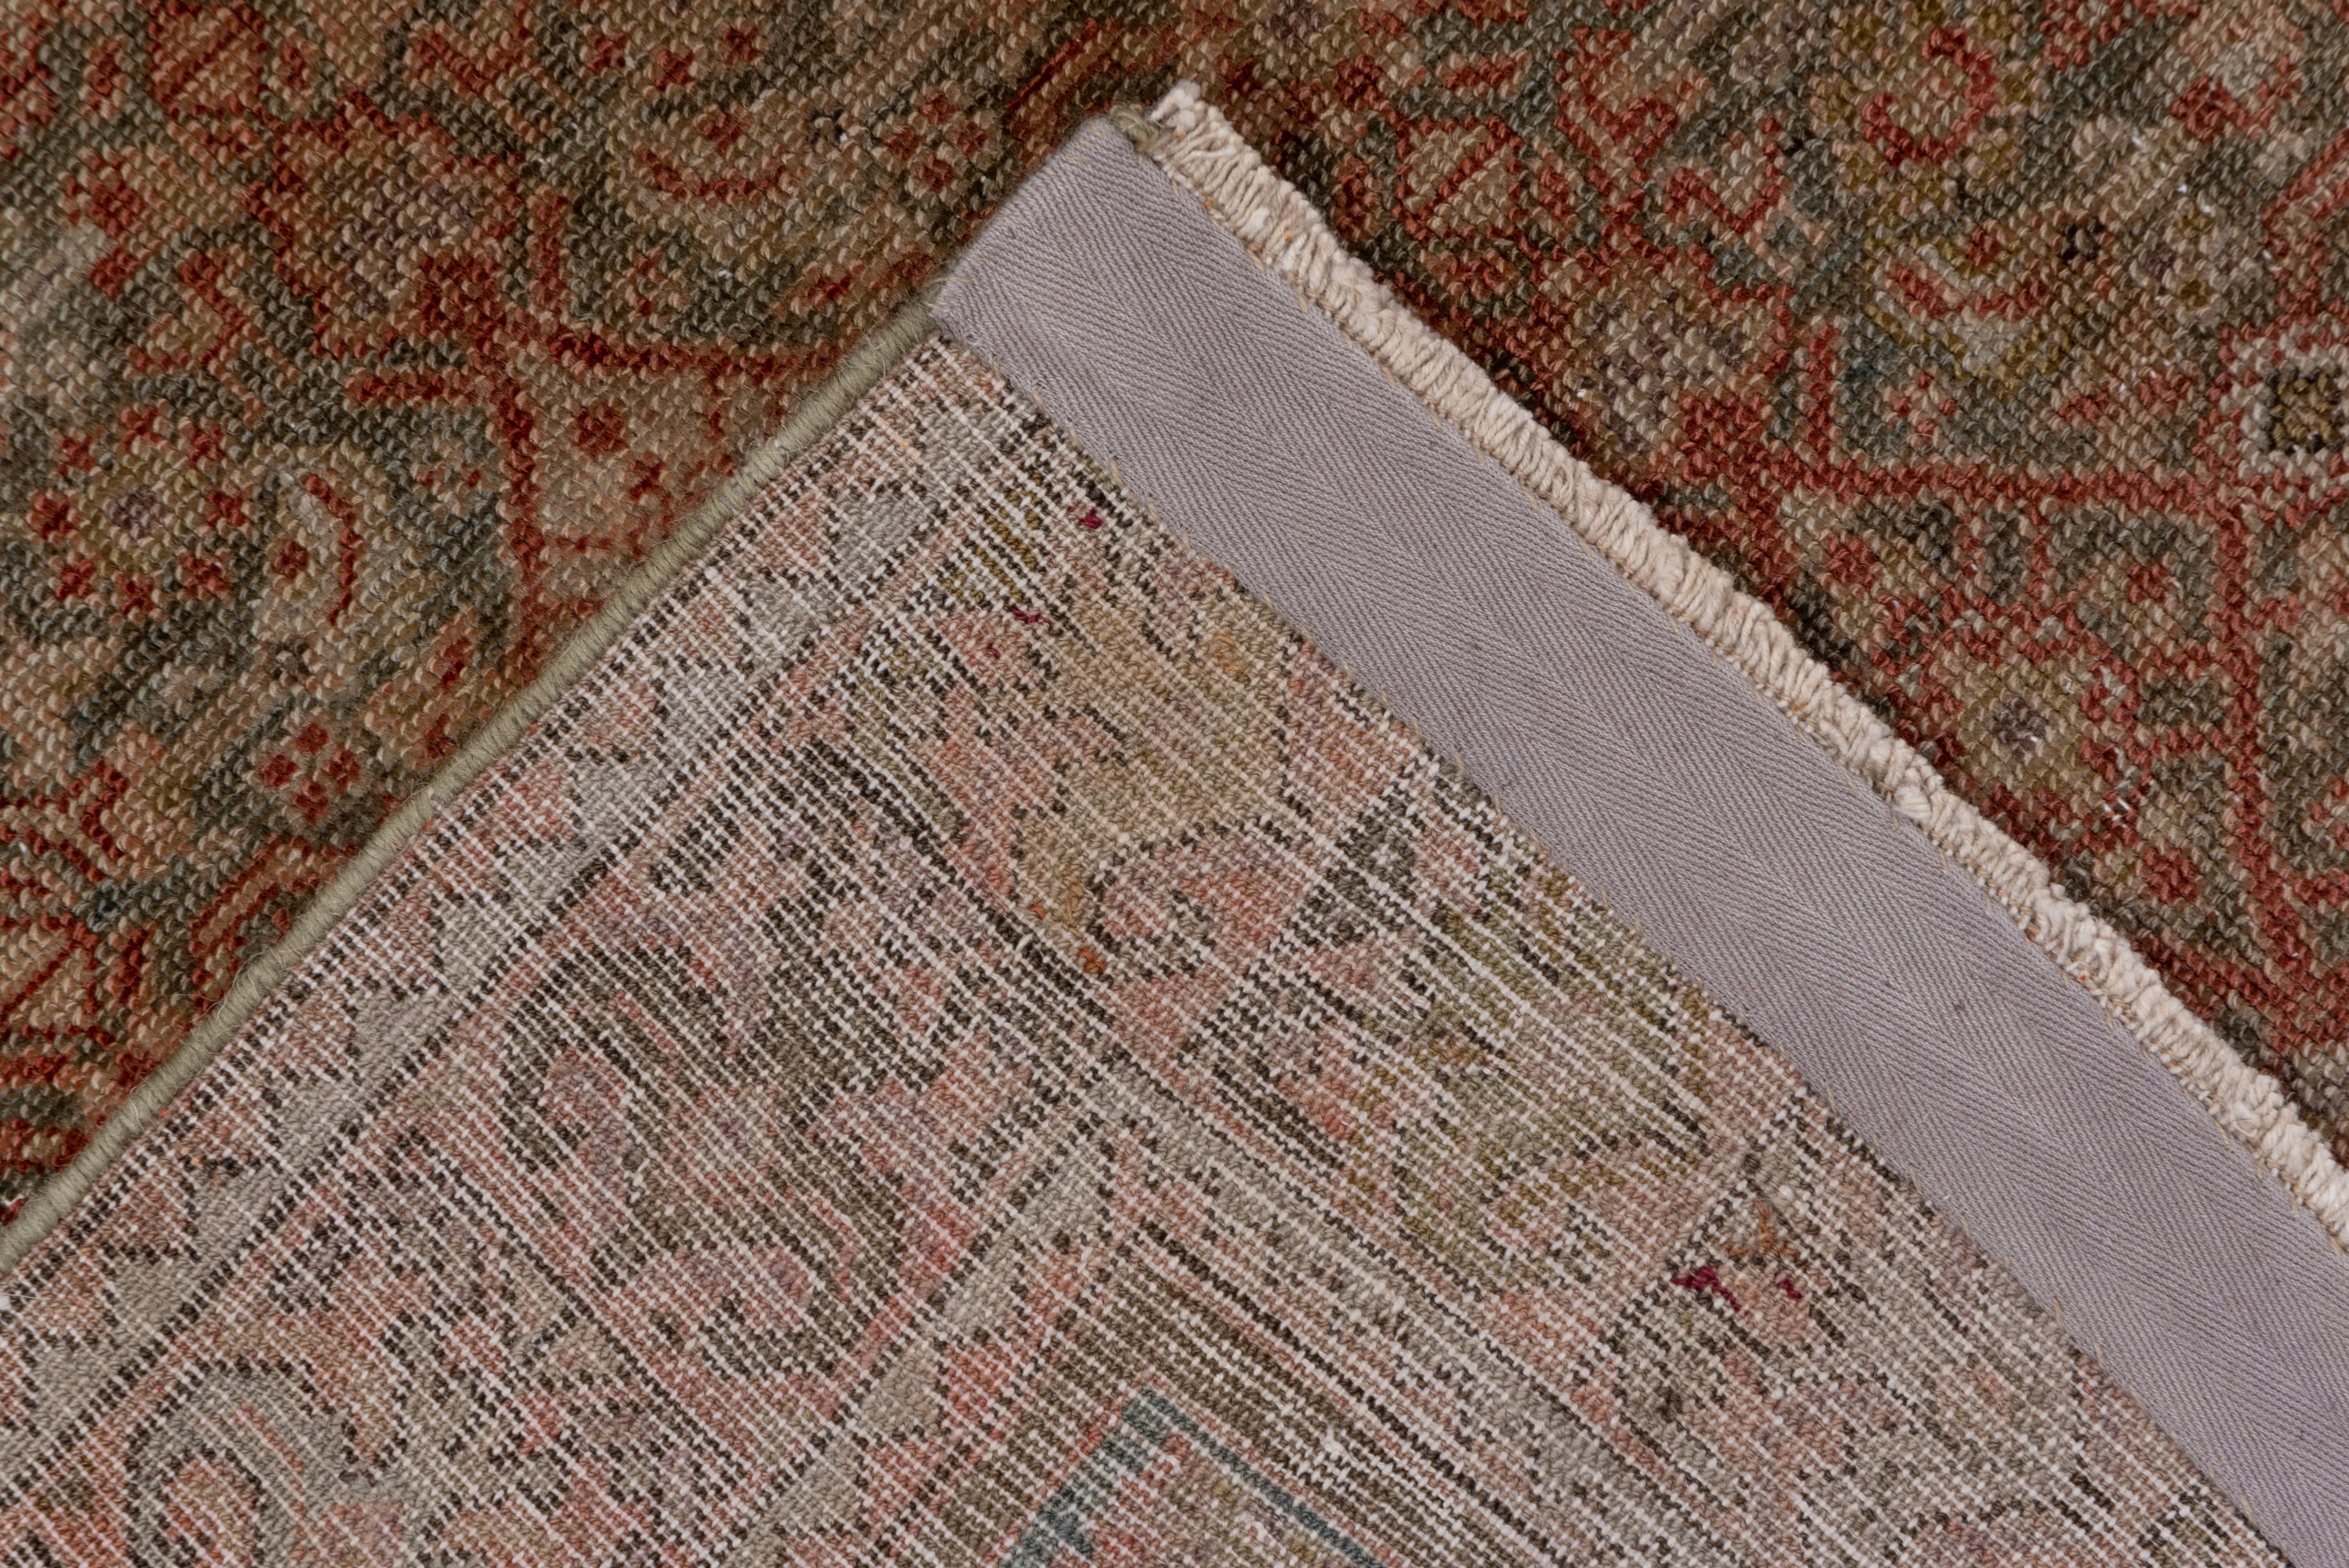 Early 20th Century Rustic Antique Persian Malayer Rug, All-Over Brown and Blue Herati Design Field